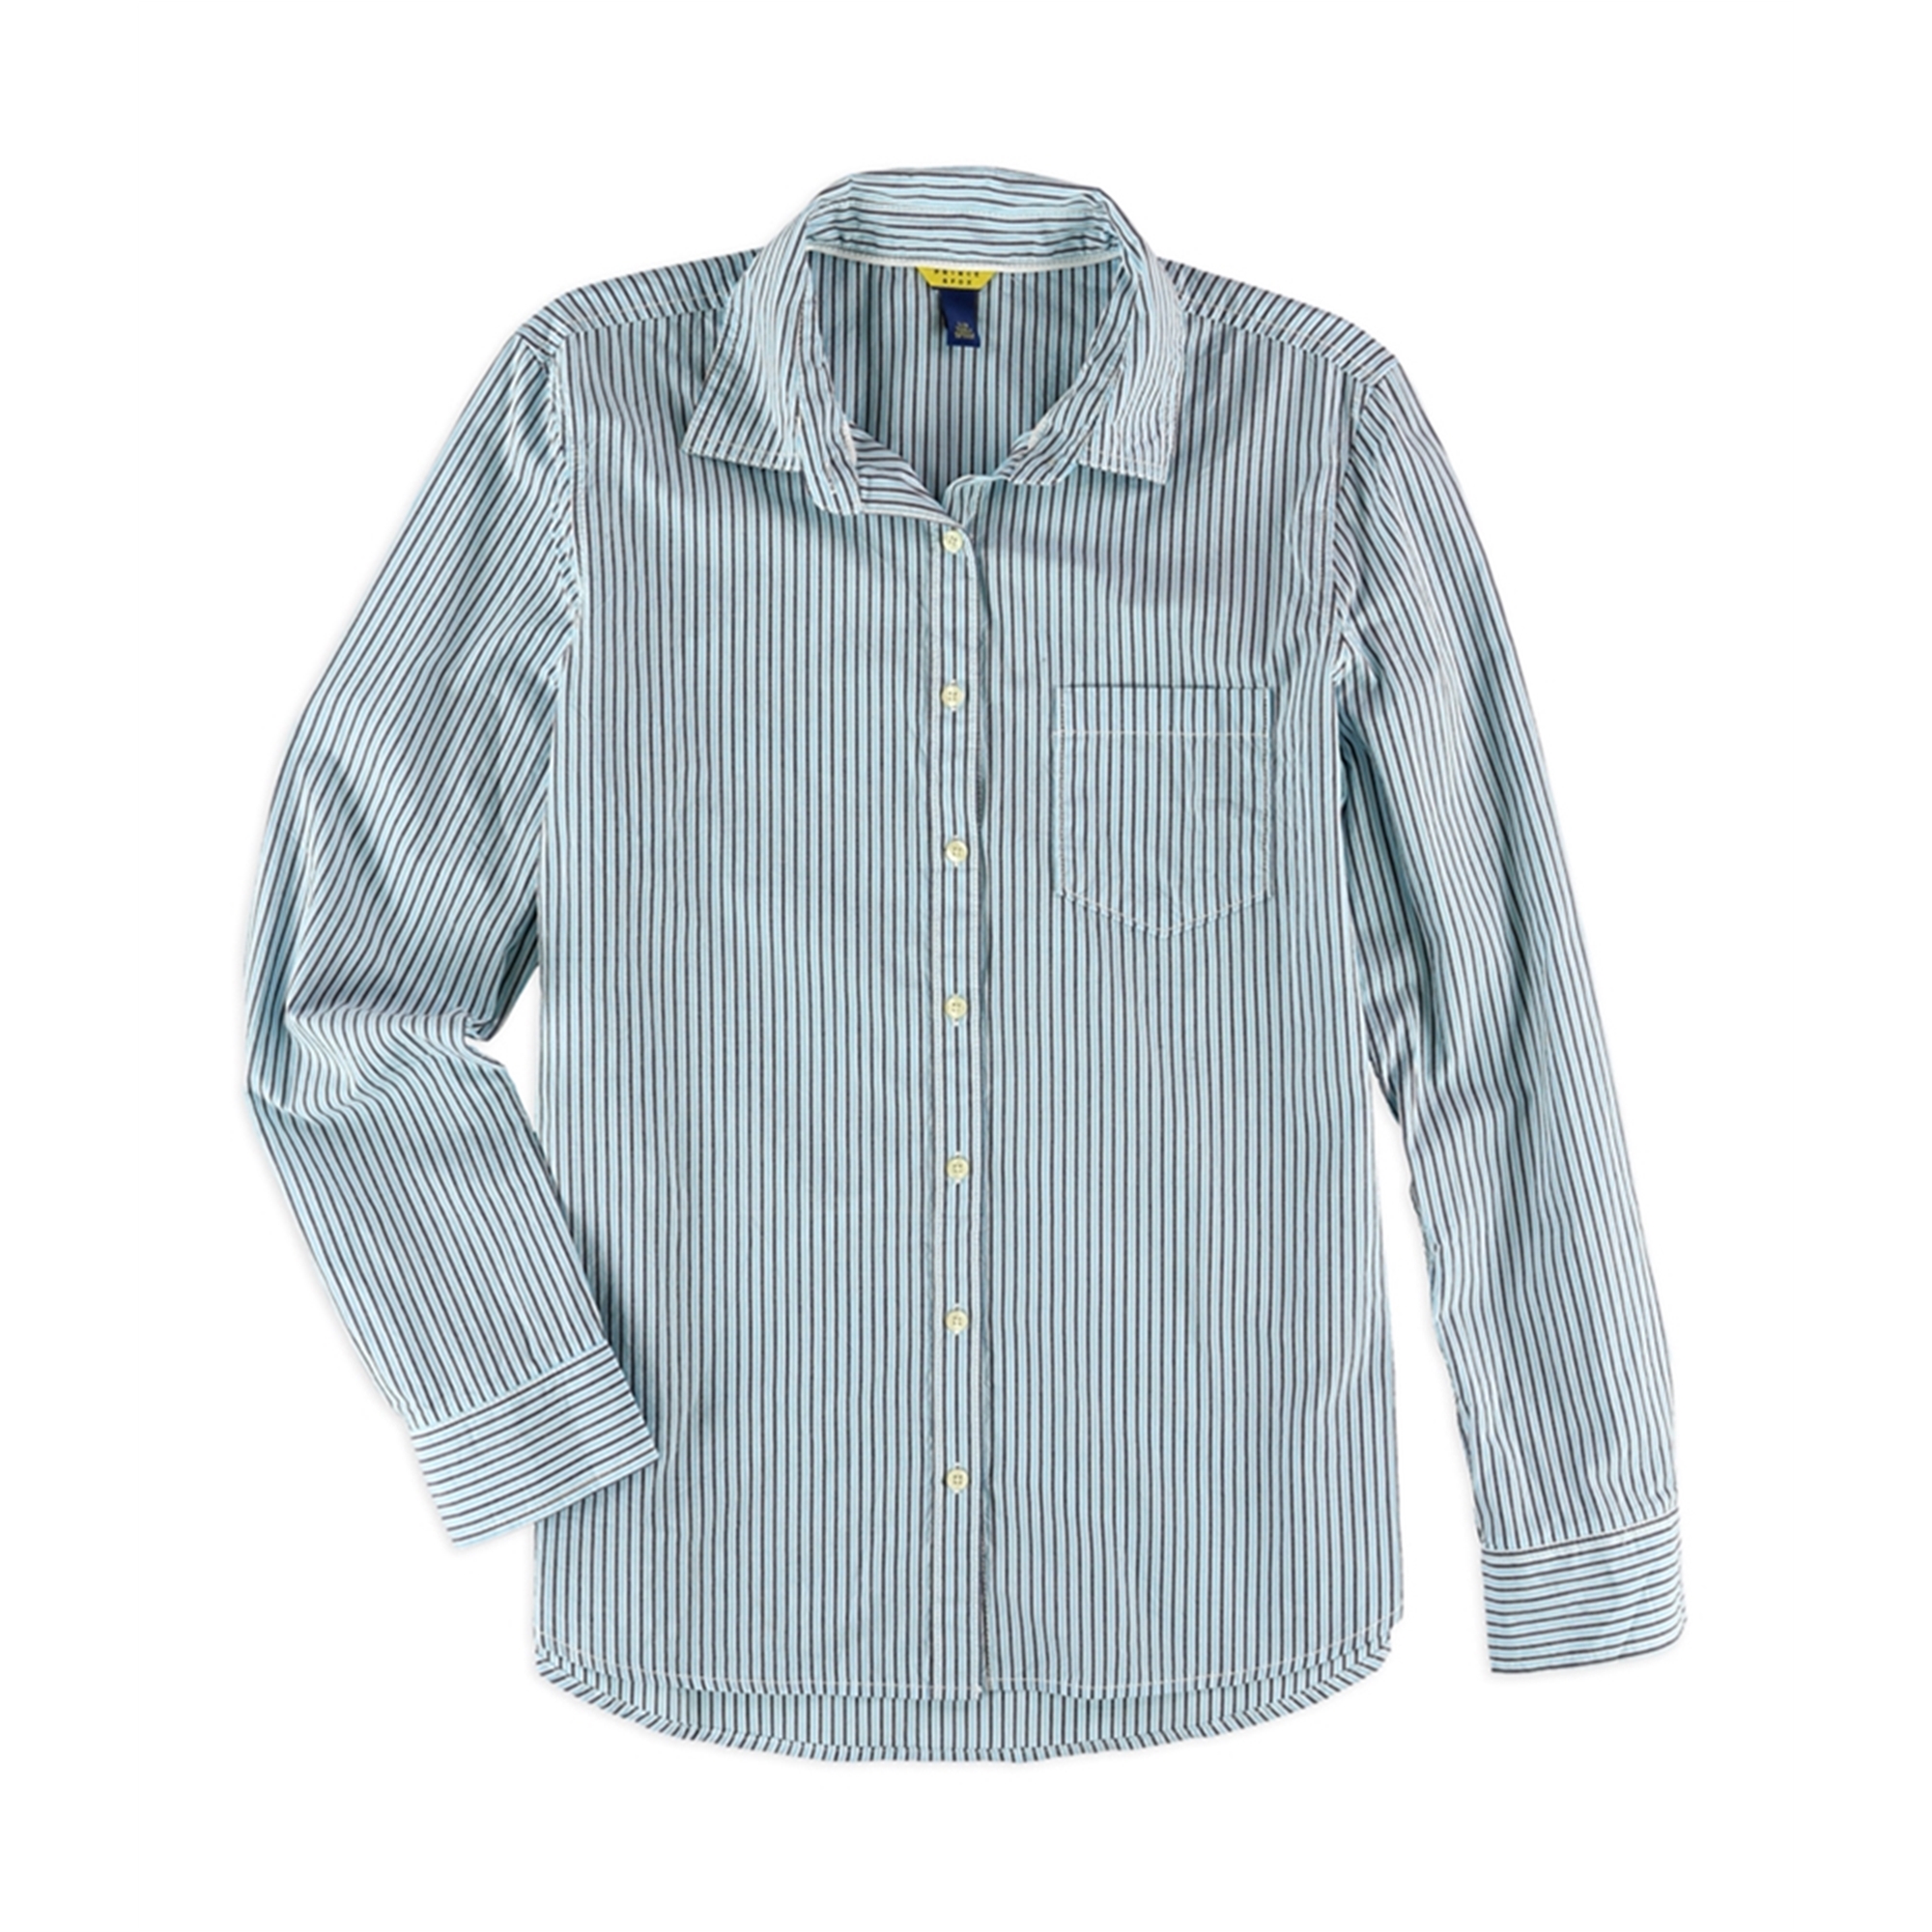 Juniors Striped Pocket Button Up Shirt - image 1 of 1